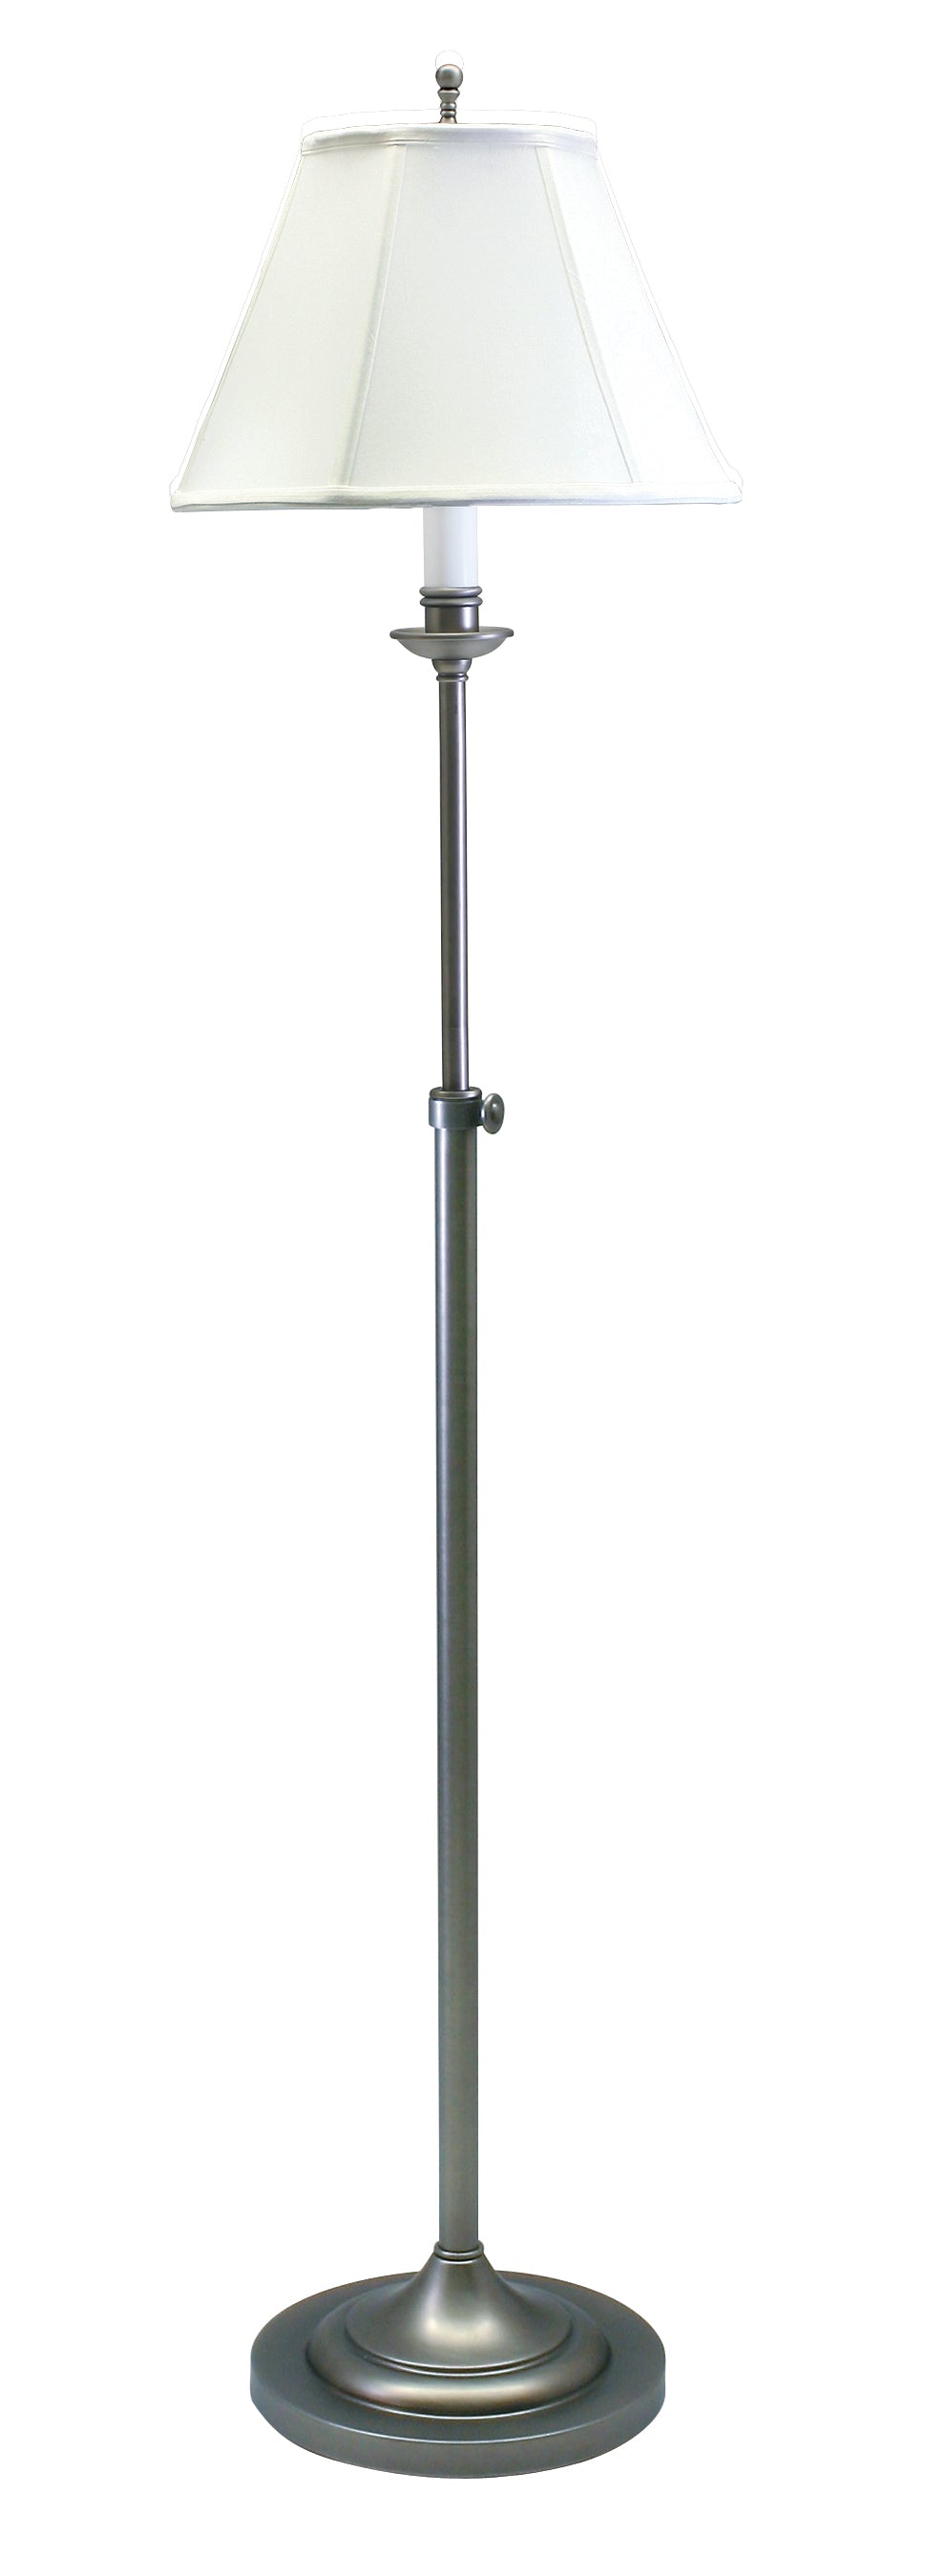 House of Troy Club Adjustable Antique Silver Floor Lamp CL201-AS